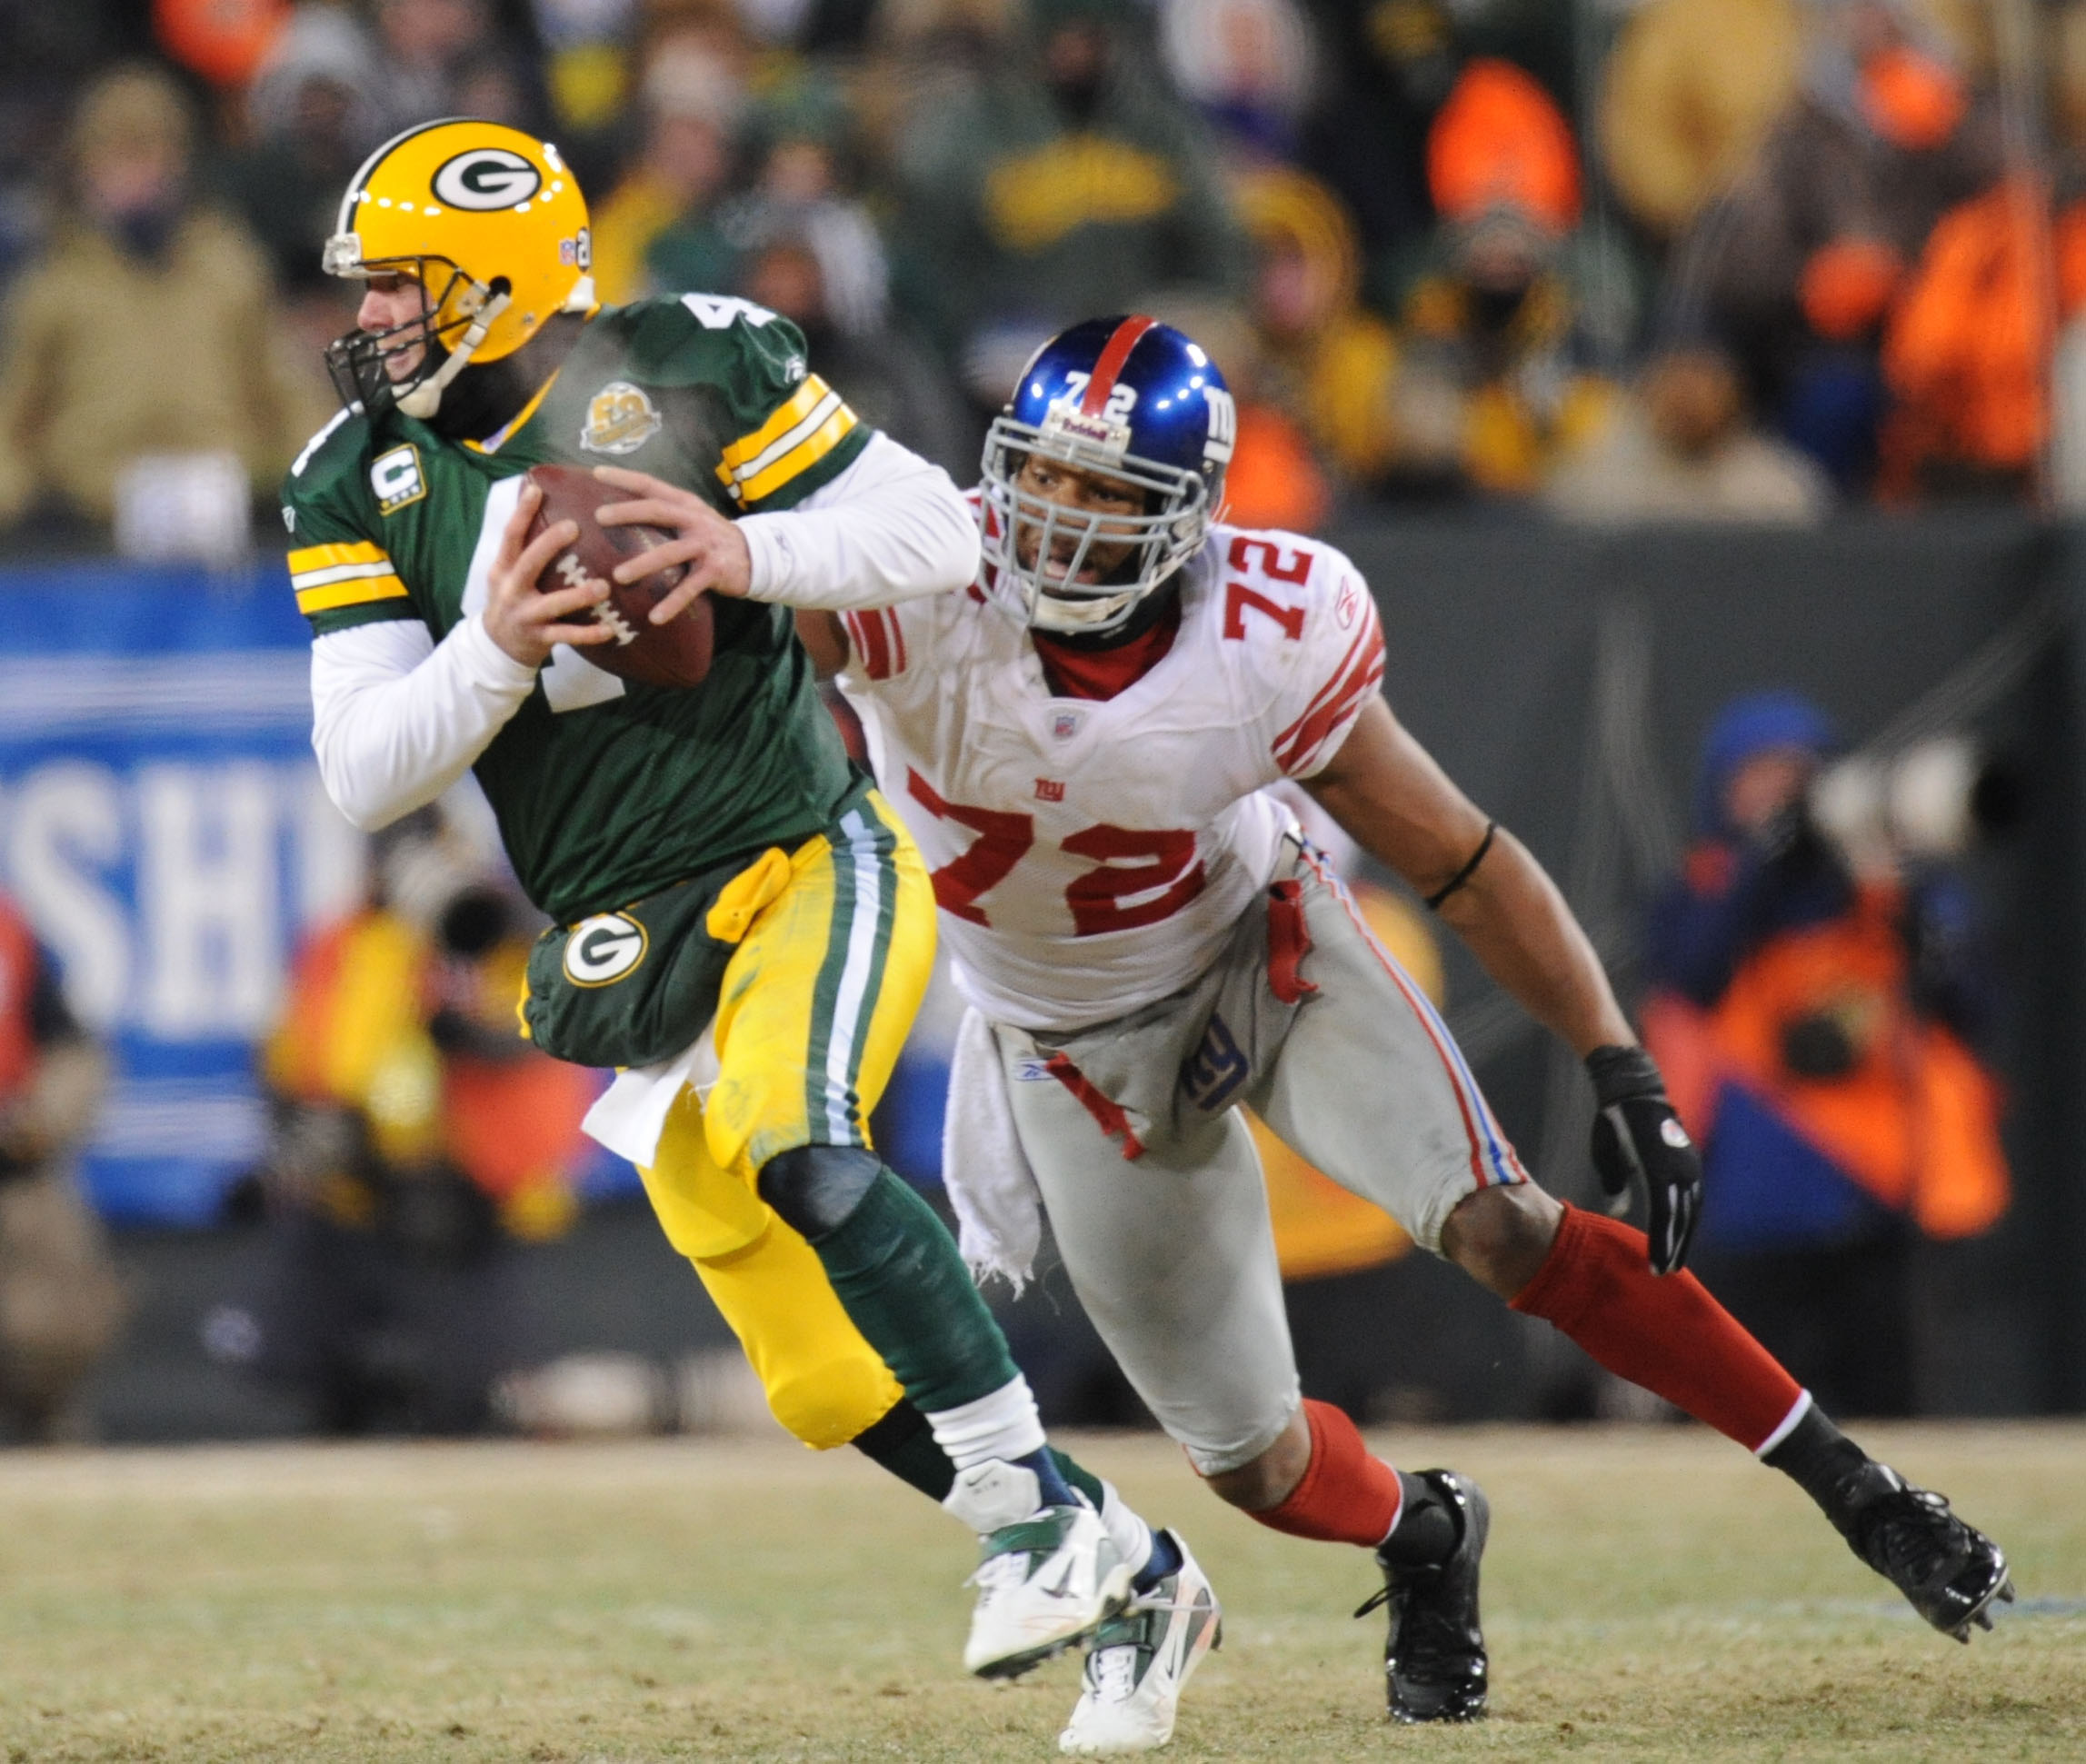 PHOTO: The New York Giants Osi Umenyiora against the Green Bay Packers Brett Favre at Lambeau Field Jan. 20, 2008 in Green Bay, Wisc. during the NFC Championship game.